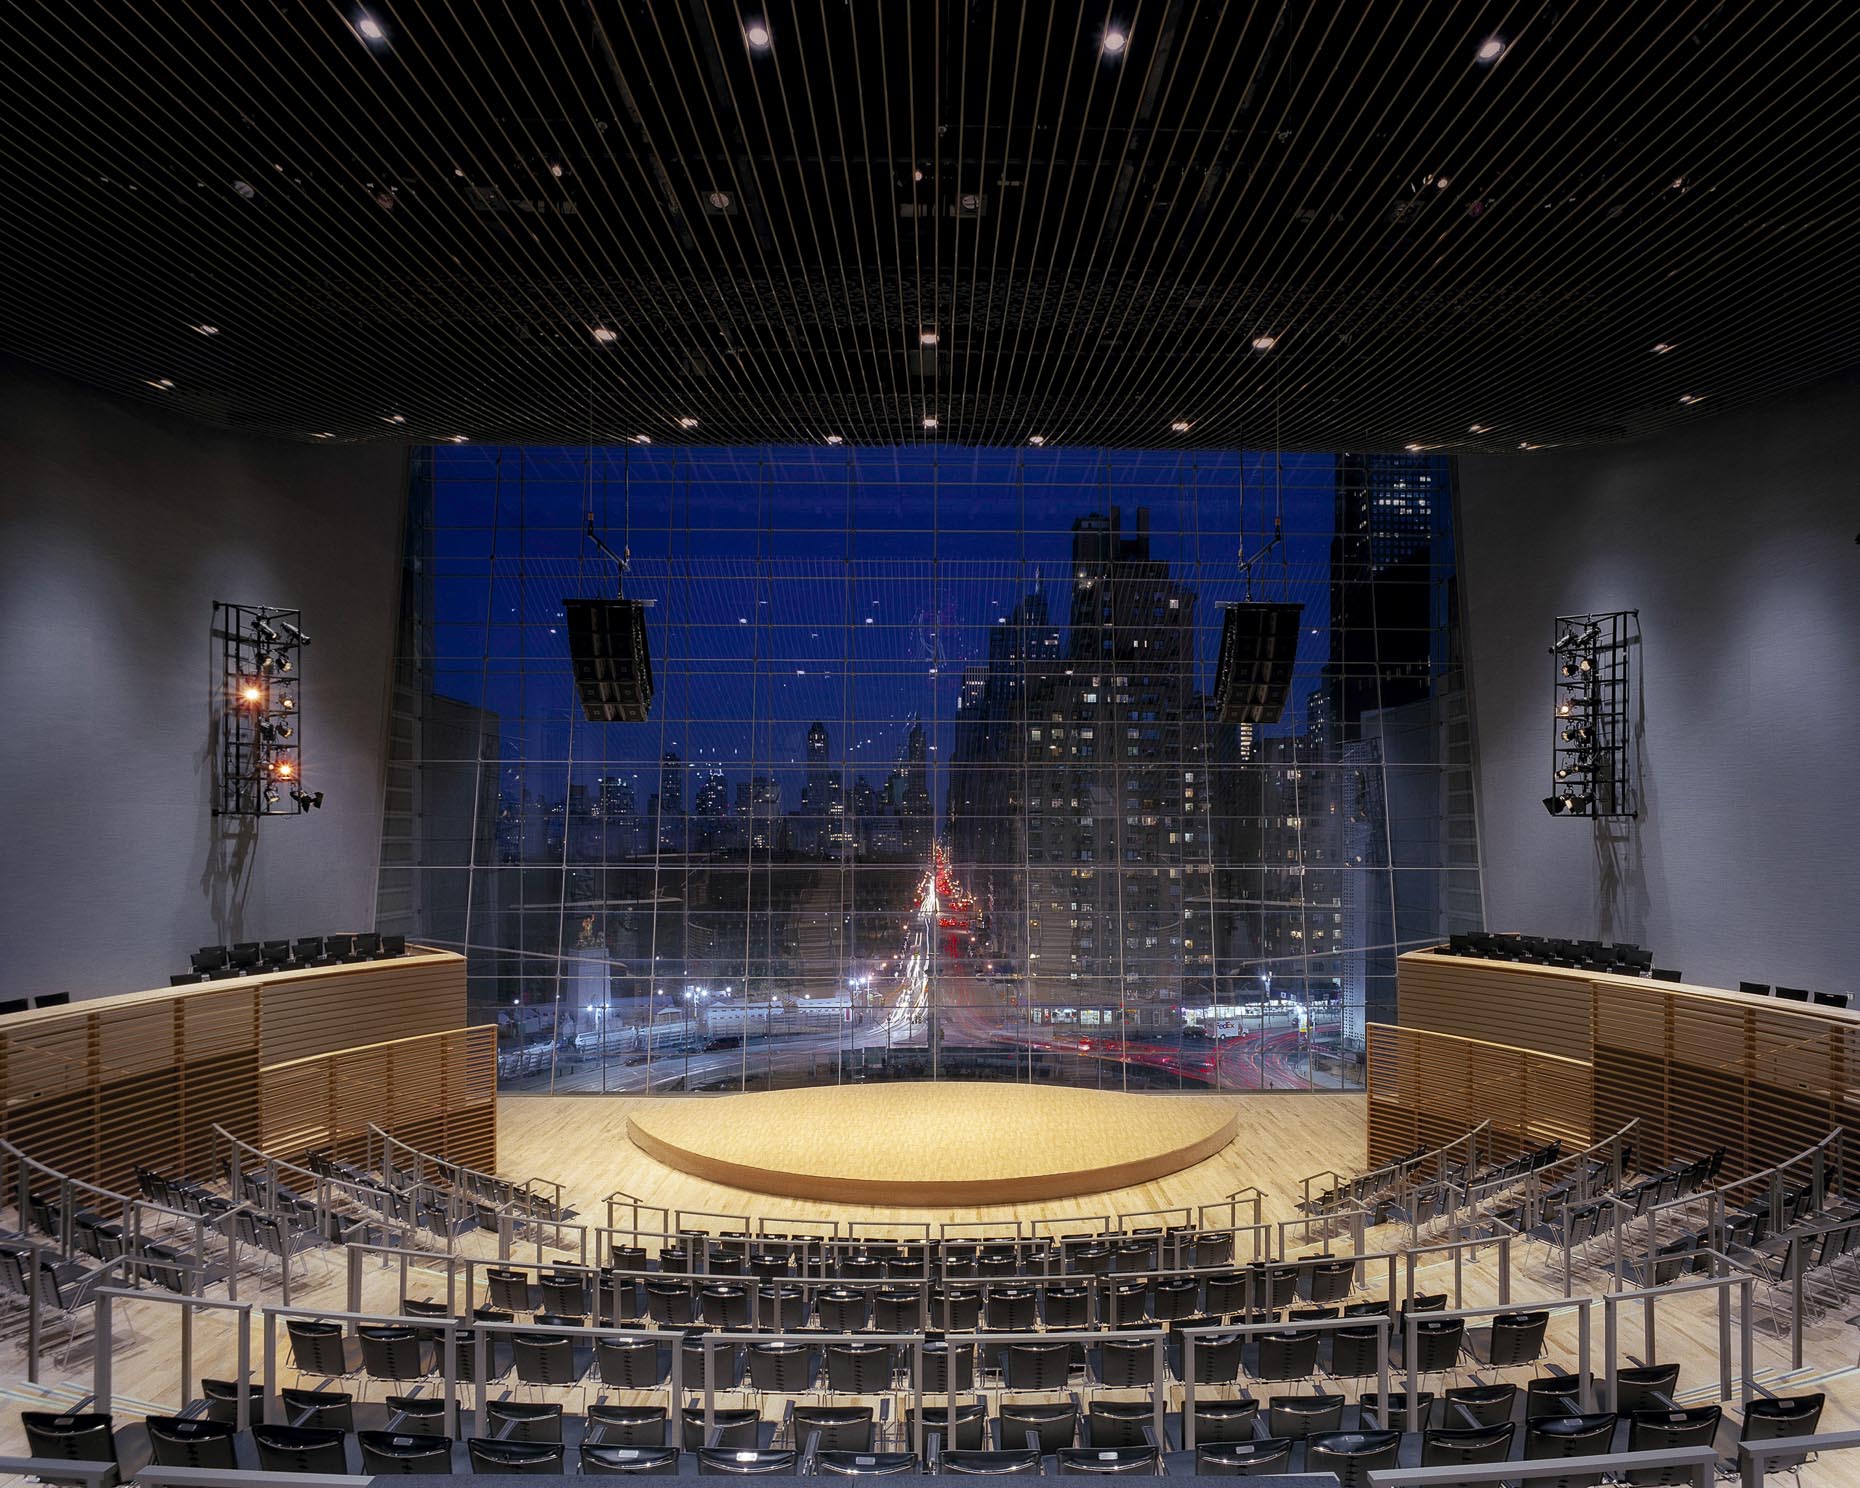 Jazz at Lincoln Center by Rafael Viñoly Architects photographed by Brad Feinknopf based in Columbus, Ohio